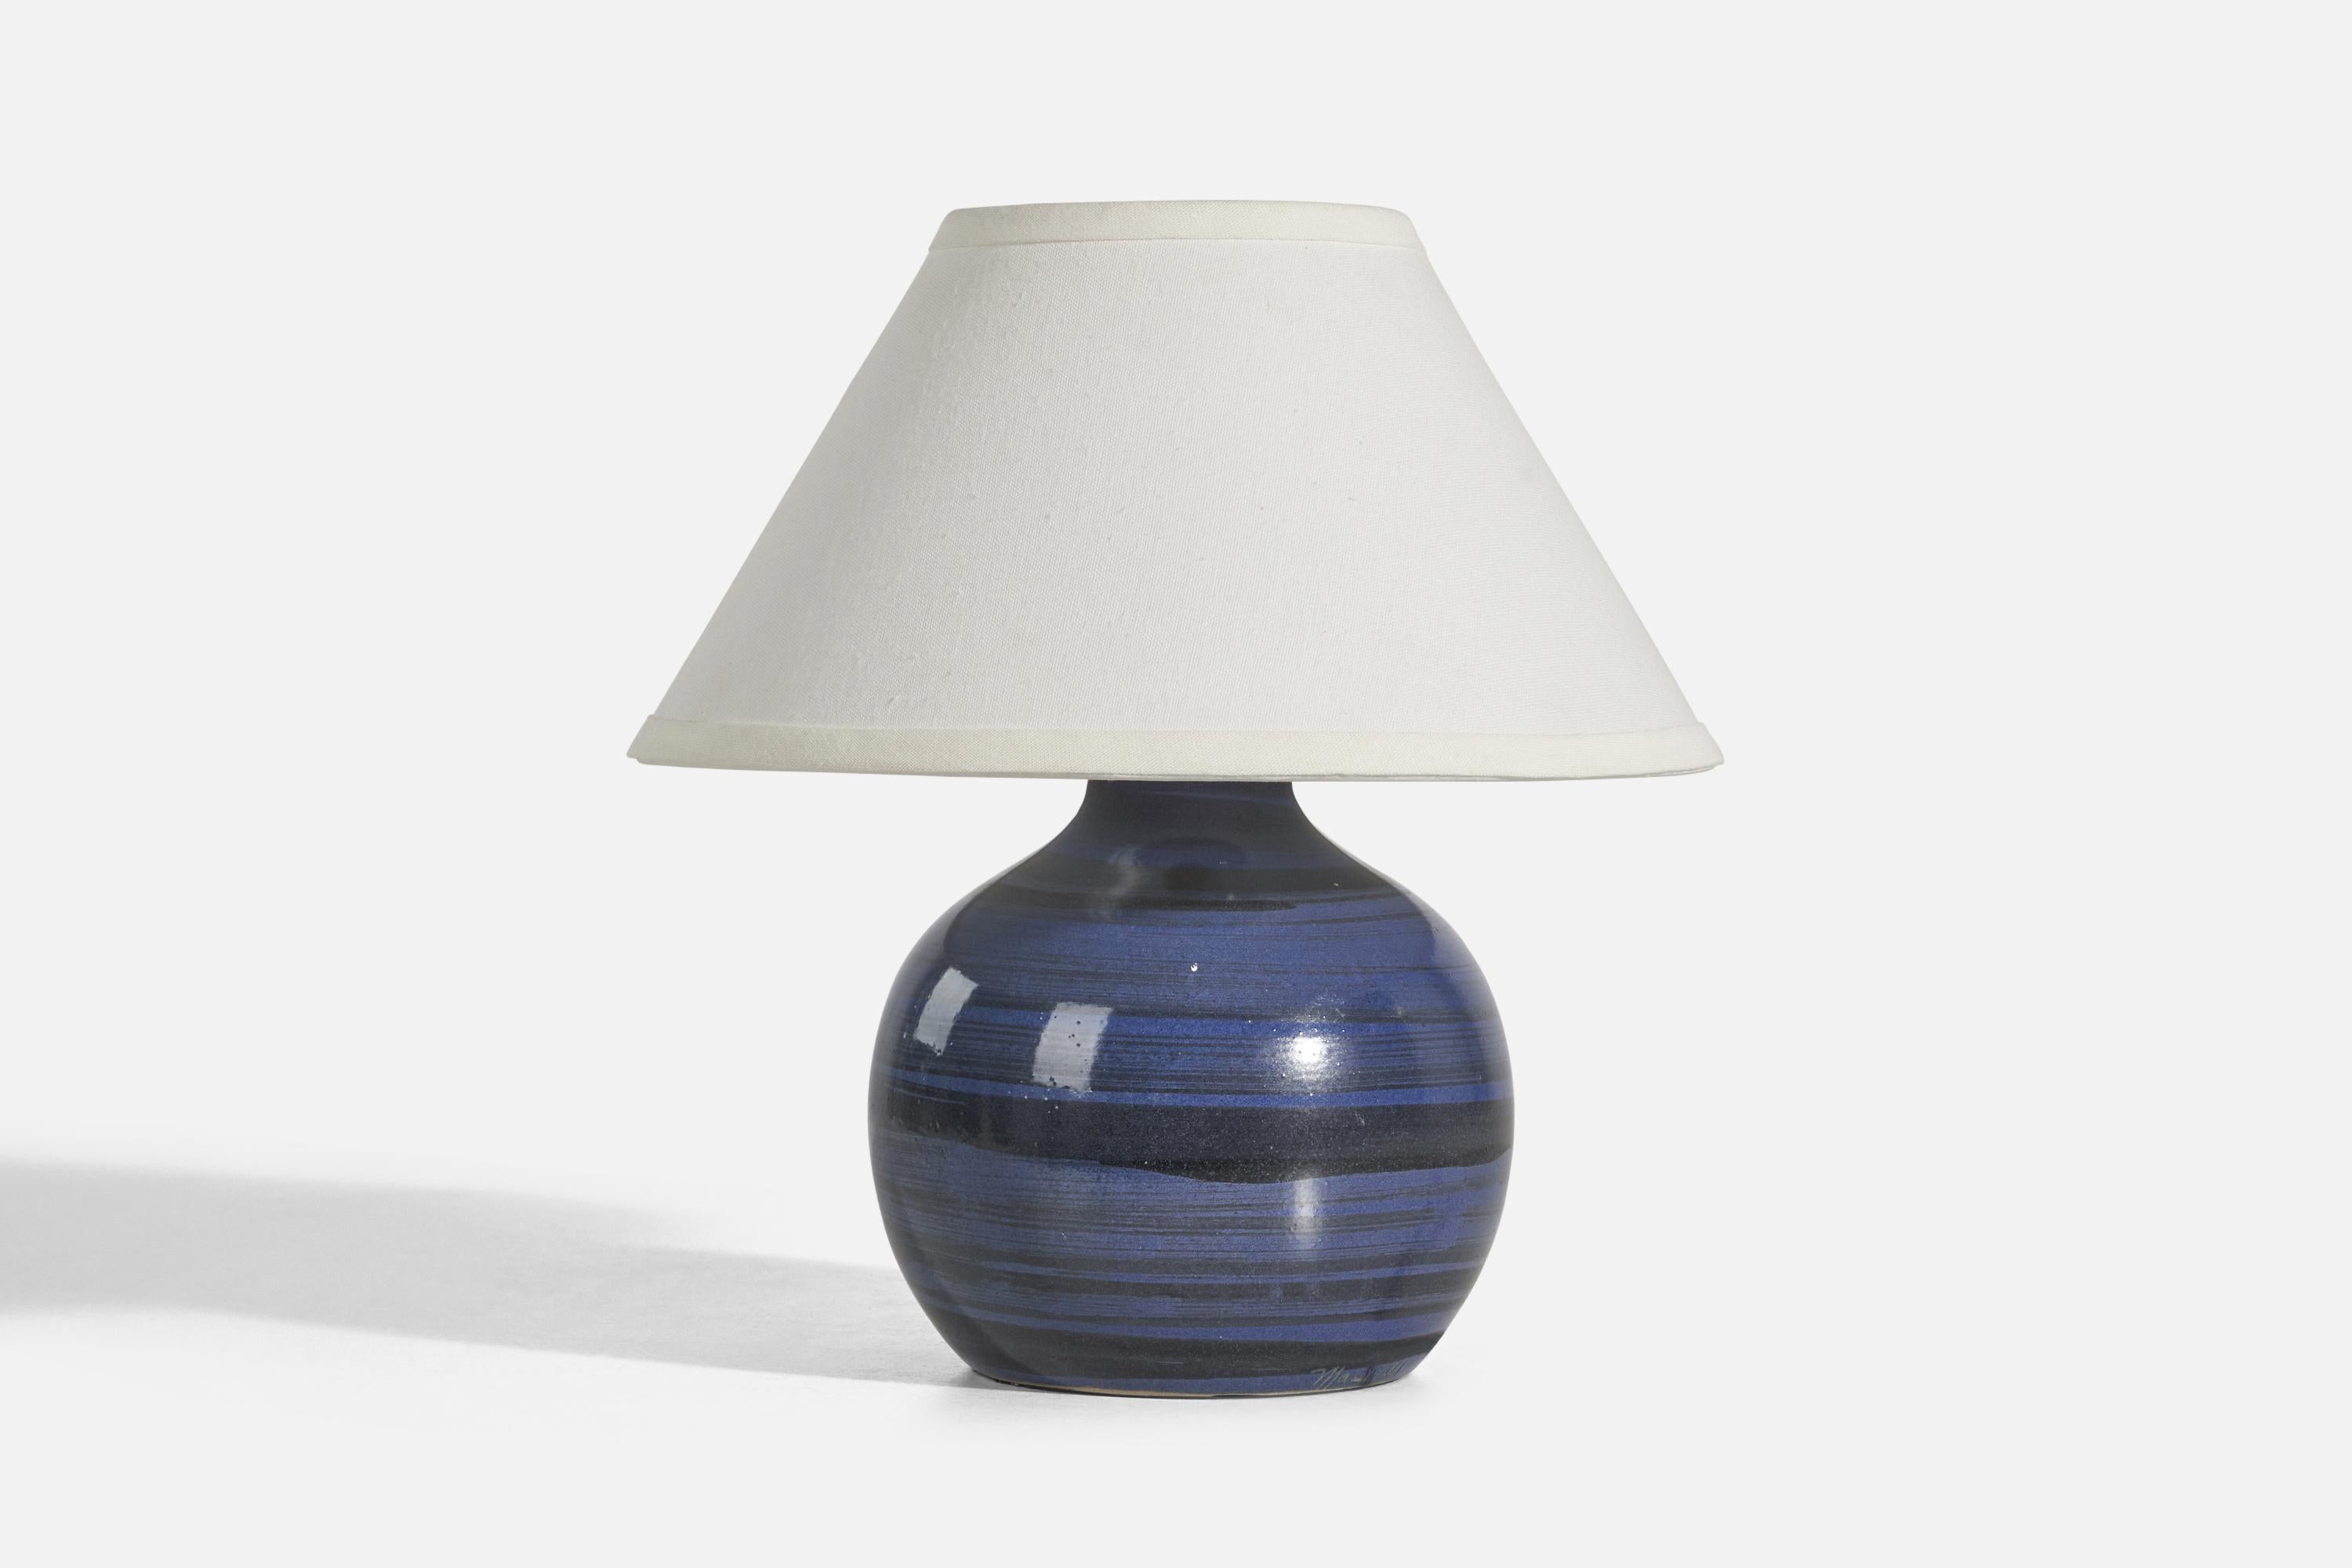 A blue and black ceramic table lamp designed by Jane & Gordon Martz and produced by Marshall Studios, Indianapolis, 1950s. 

Sold without Lampshade
Dimensions of Lamp (inches) : 9.5 x 7.25 x 7.25 (Height x Width x Depth)
Dimensions of Lampshade